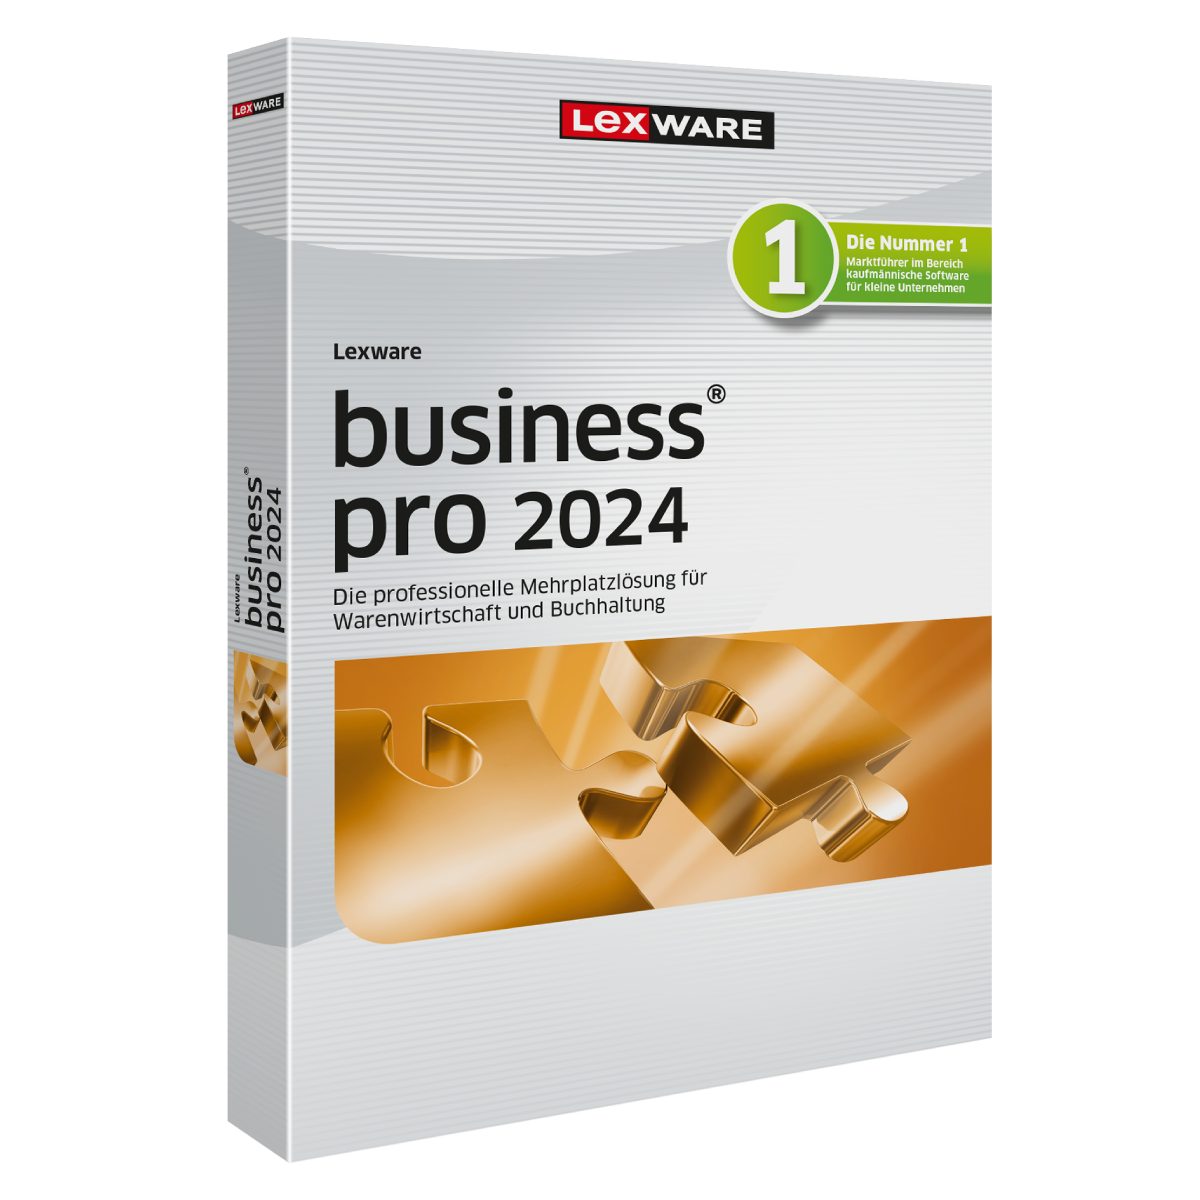 LEXWARE ESD / Lexware business pro 2024 / Online Download